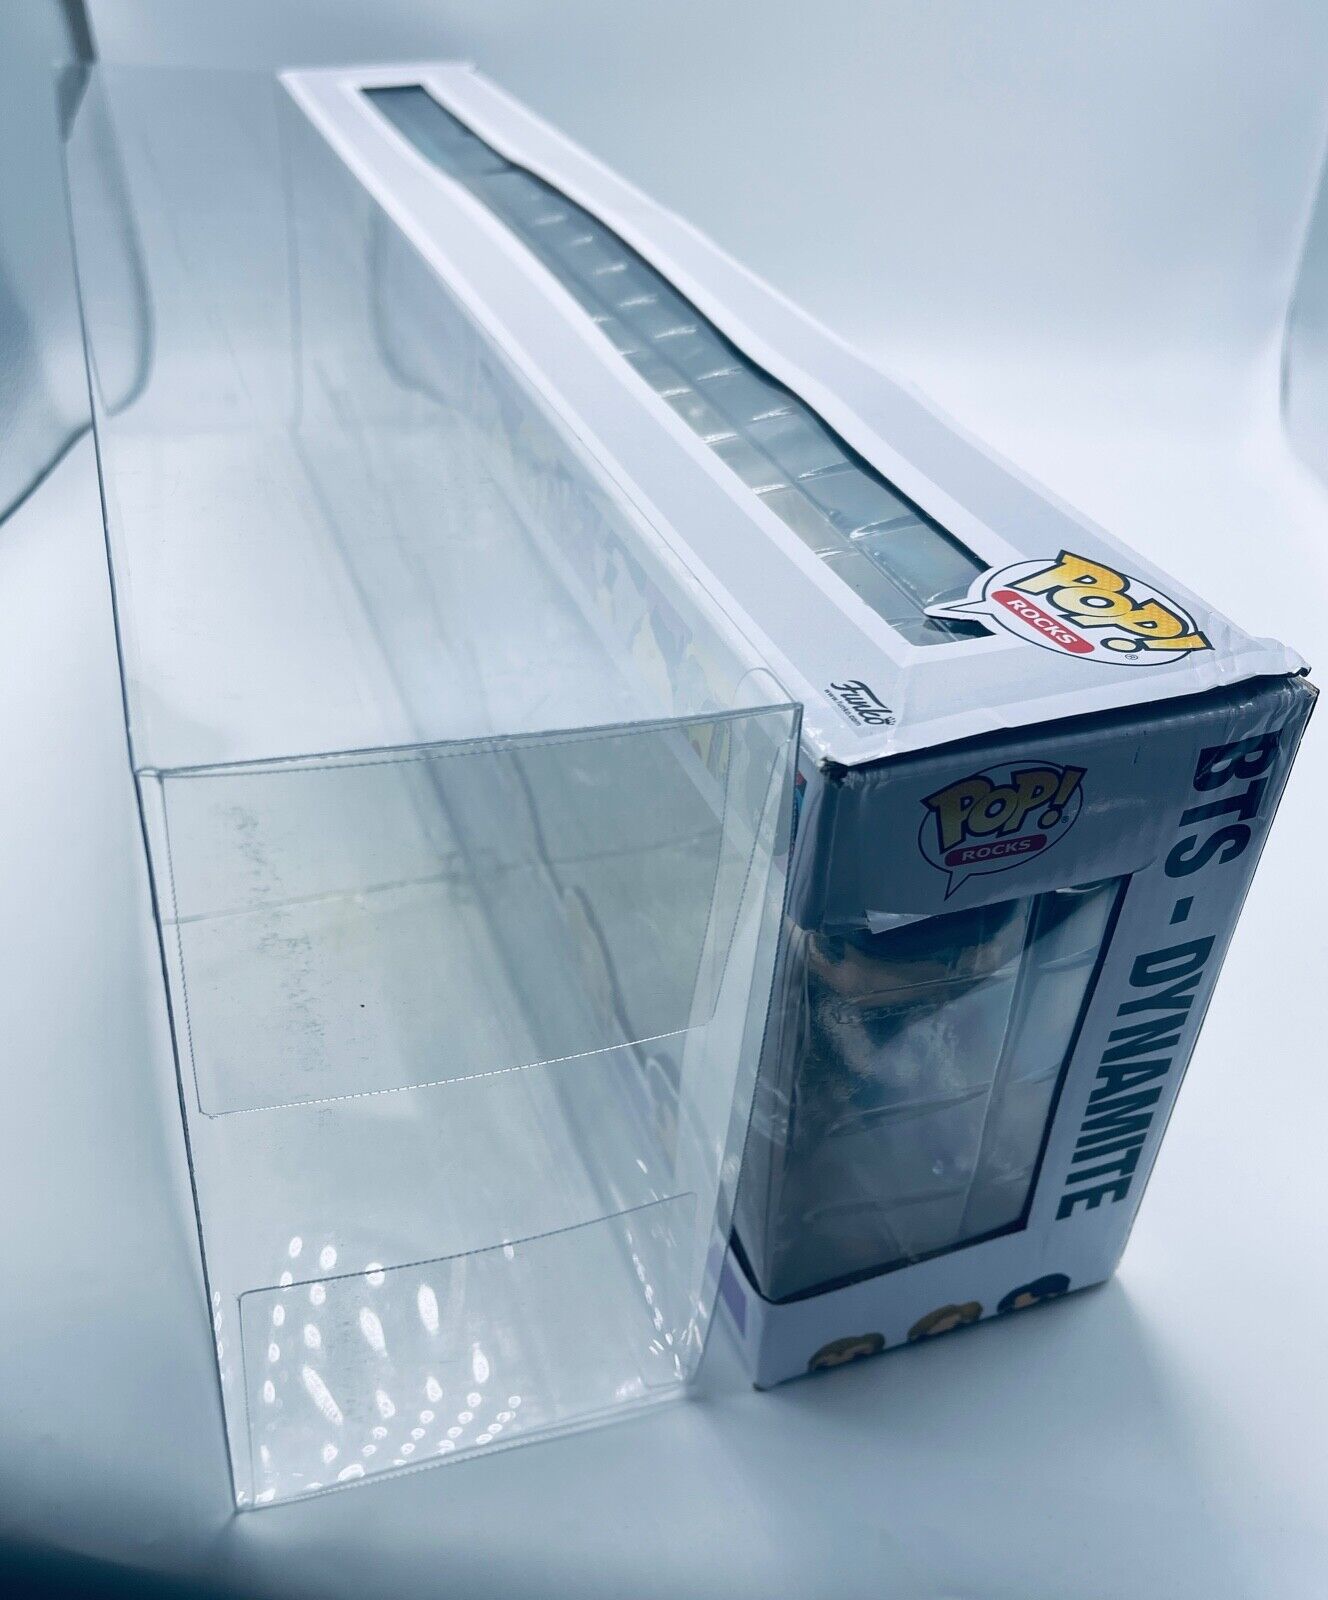 Funko POP Protector 0.50mm Plastic ONLY Fits the BTS 7 pack NO POPS INCLUDED